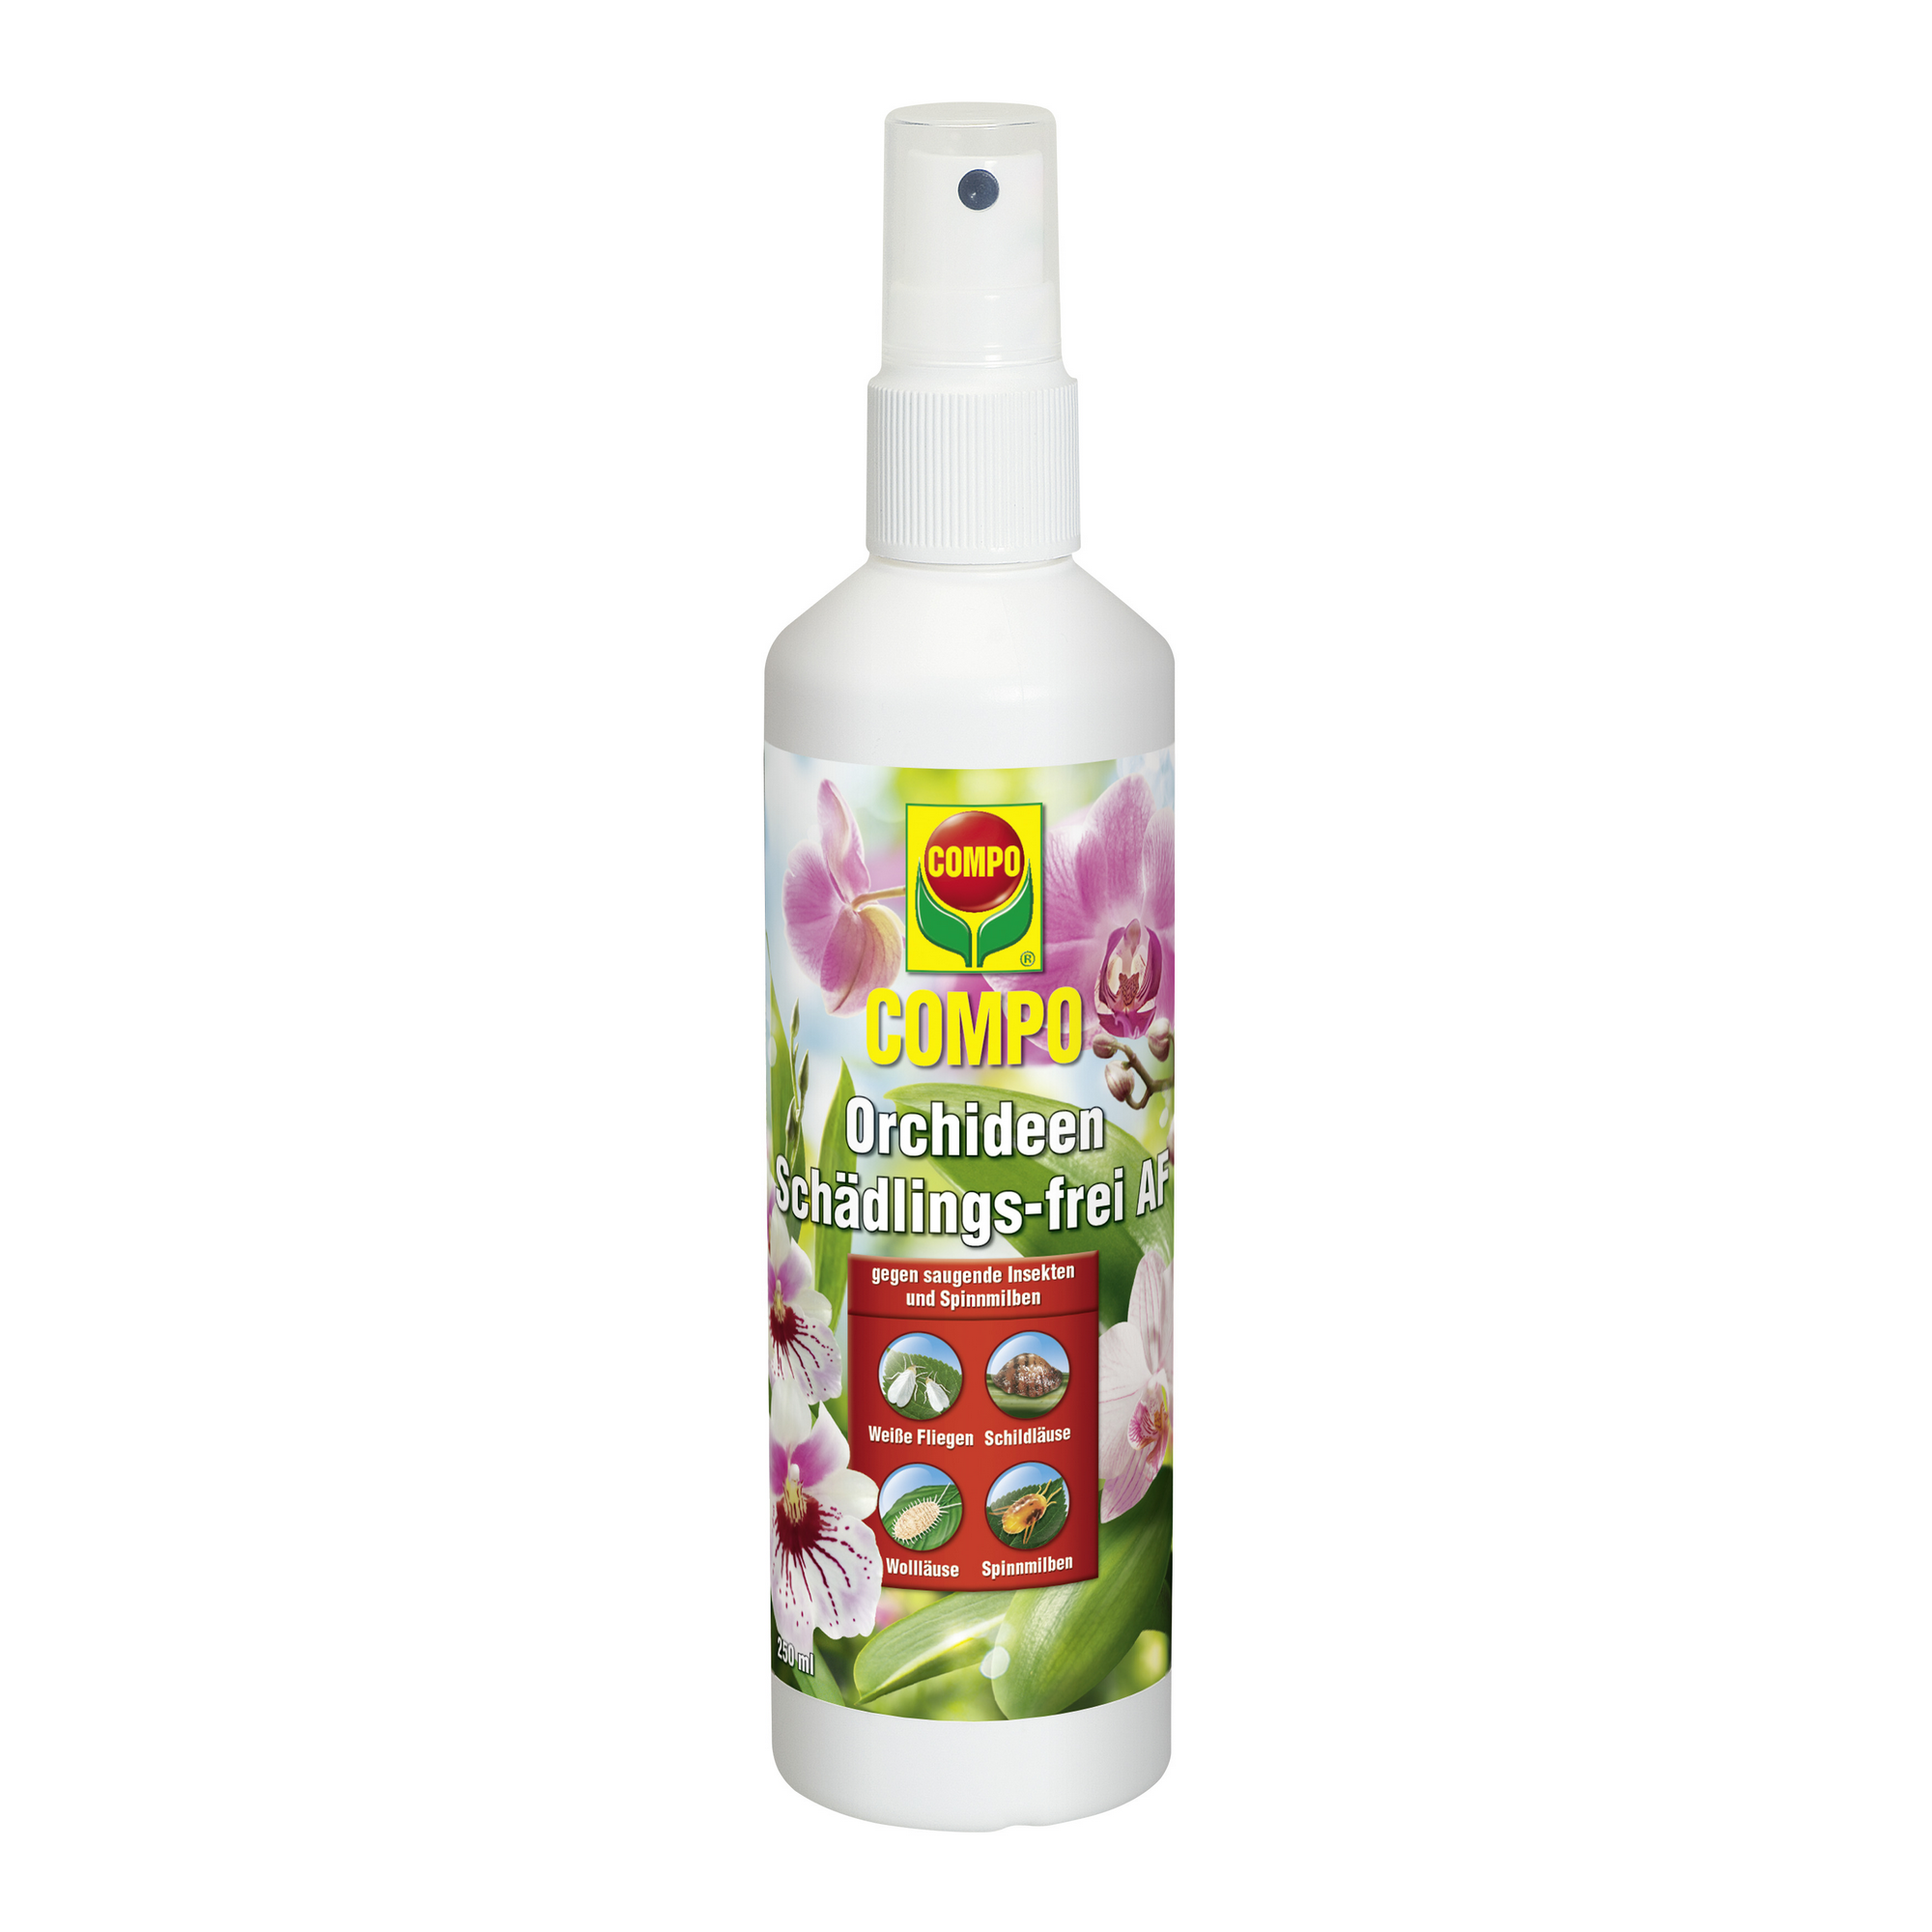 Orchideen Schädlings-frei AF 250 ml + product picture